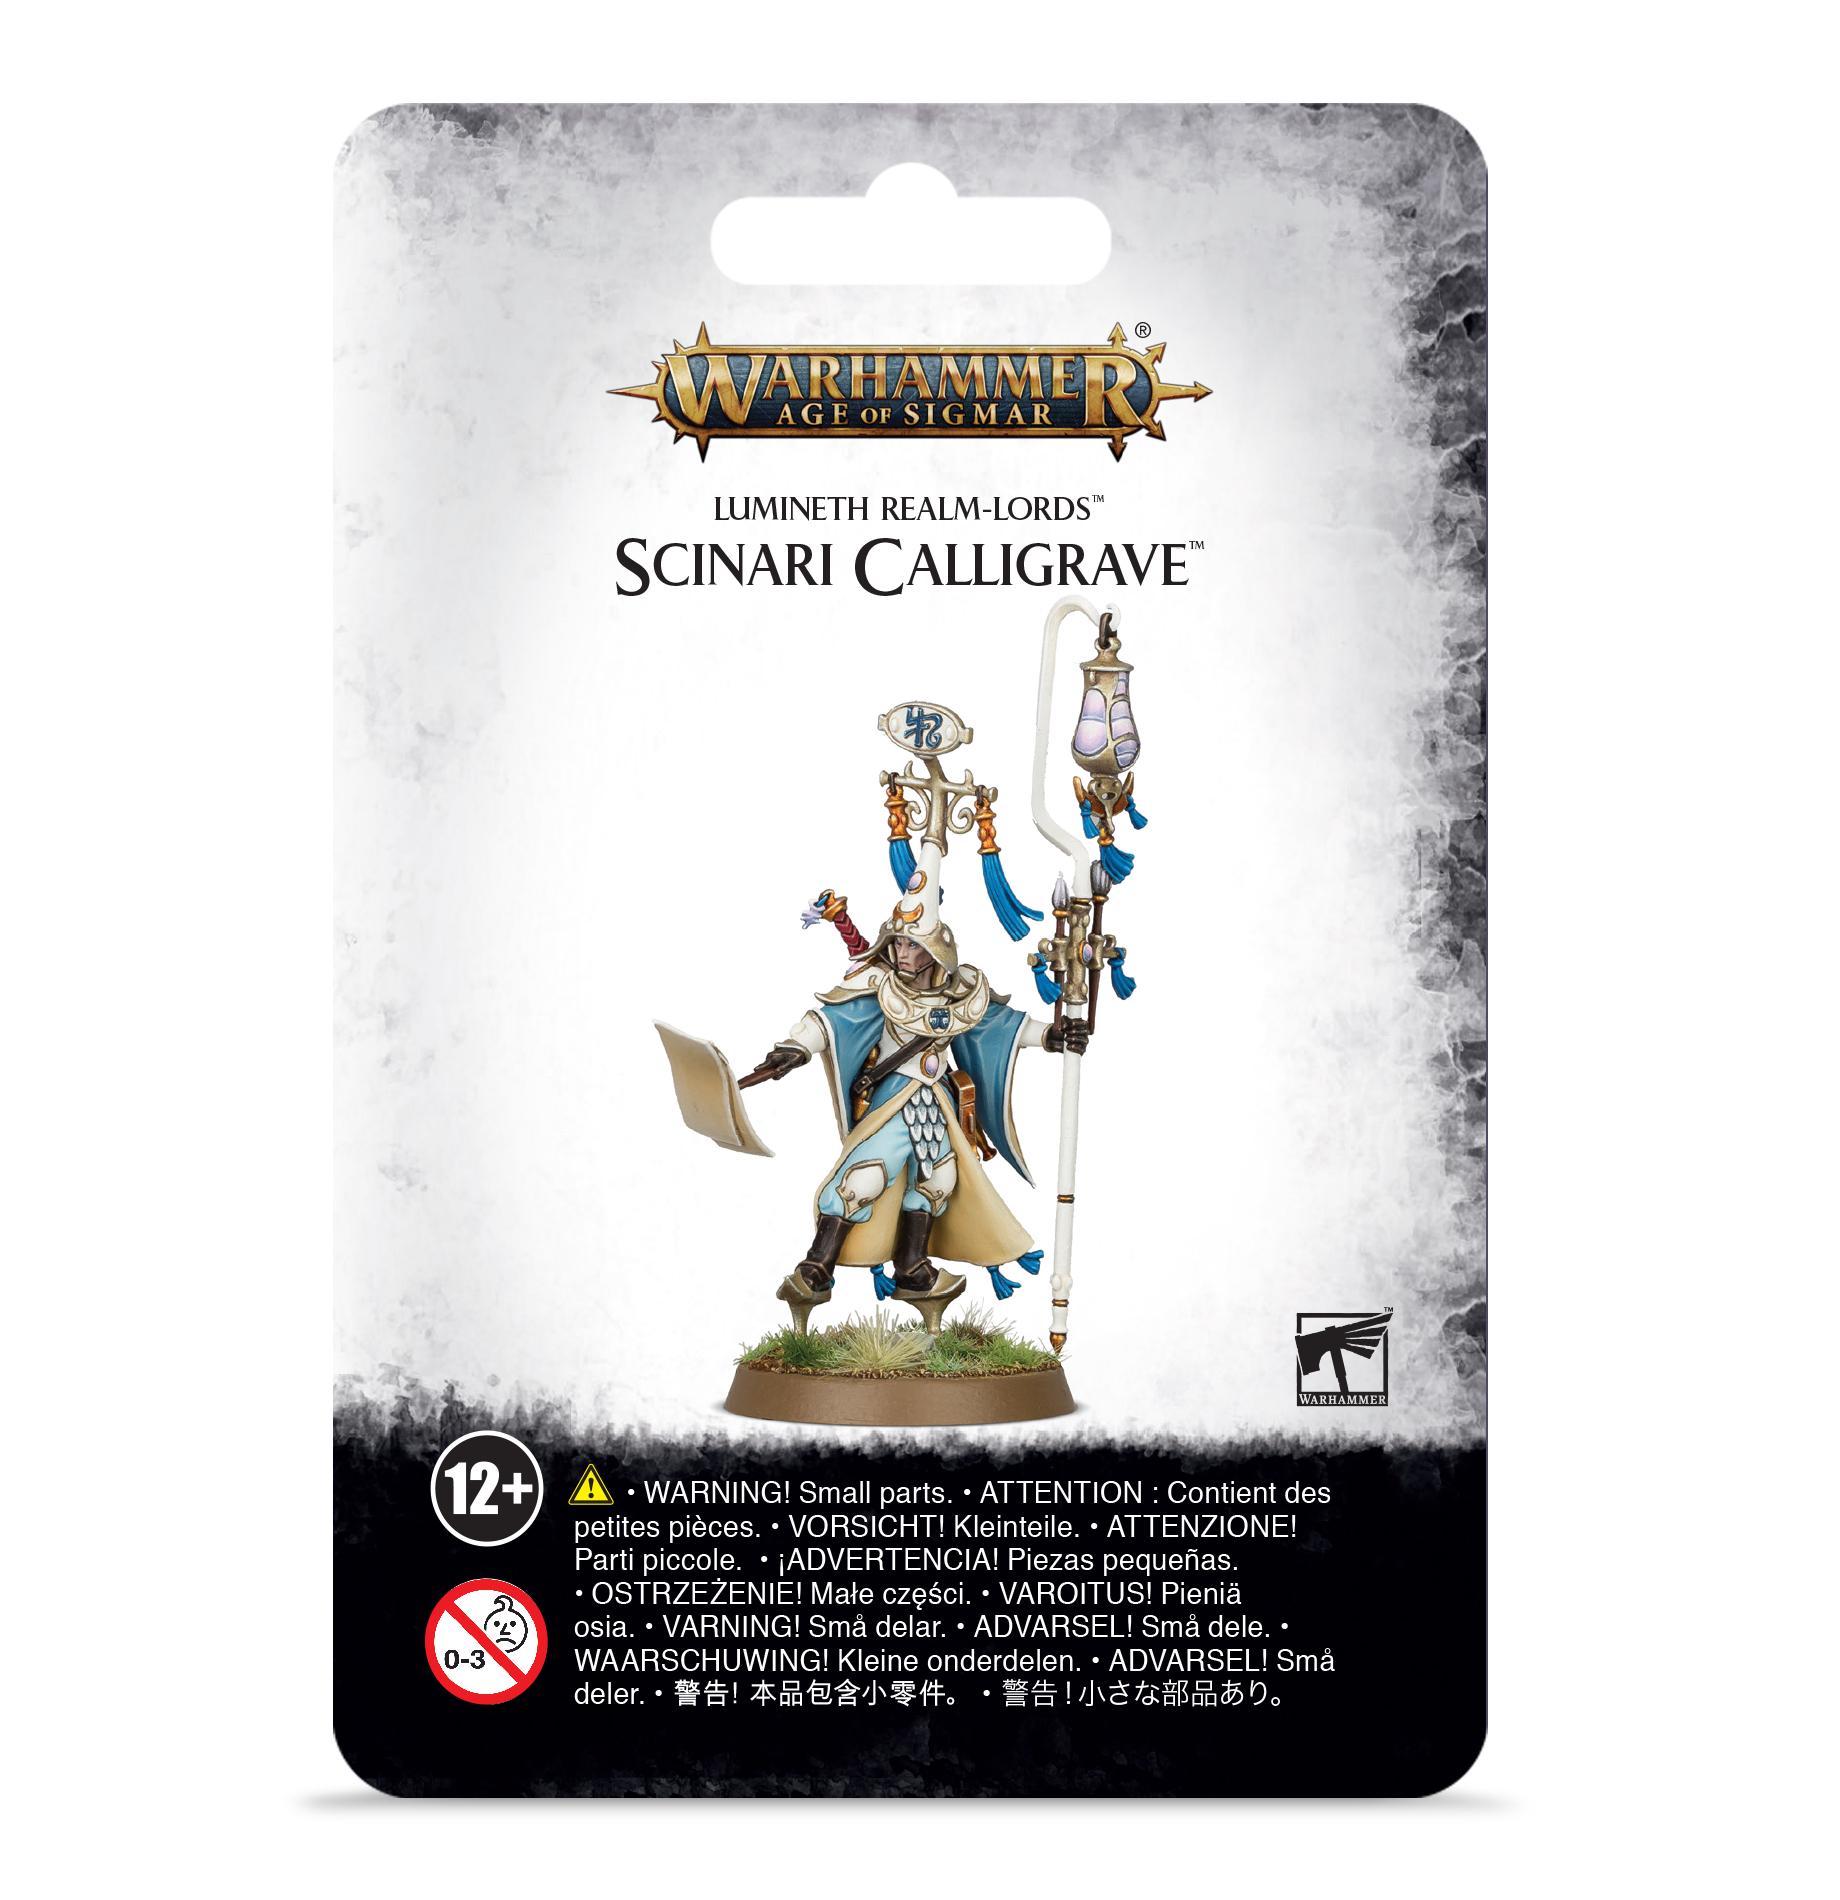 Scinari Calligrave - 87-13 - Lumineth Realm-Lords - Warhammer Age of Sigmar